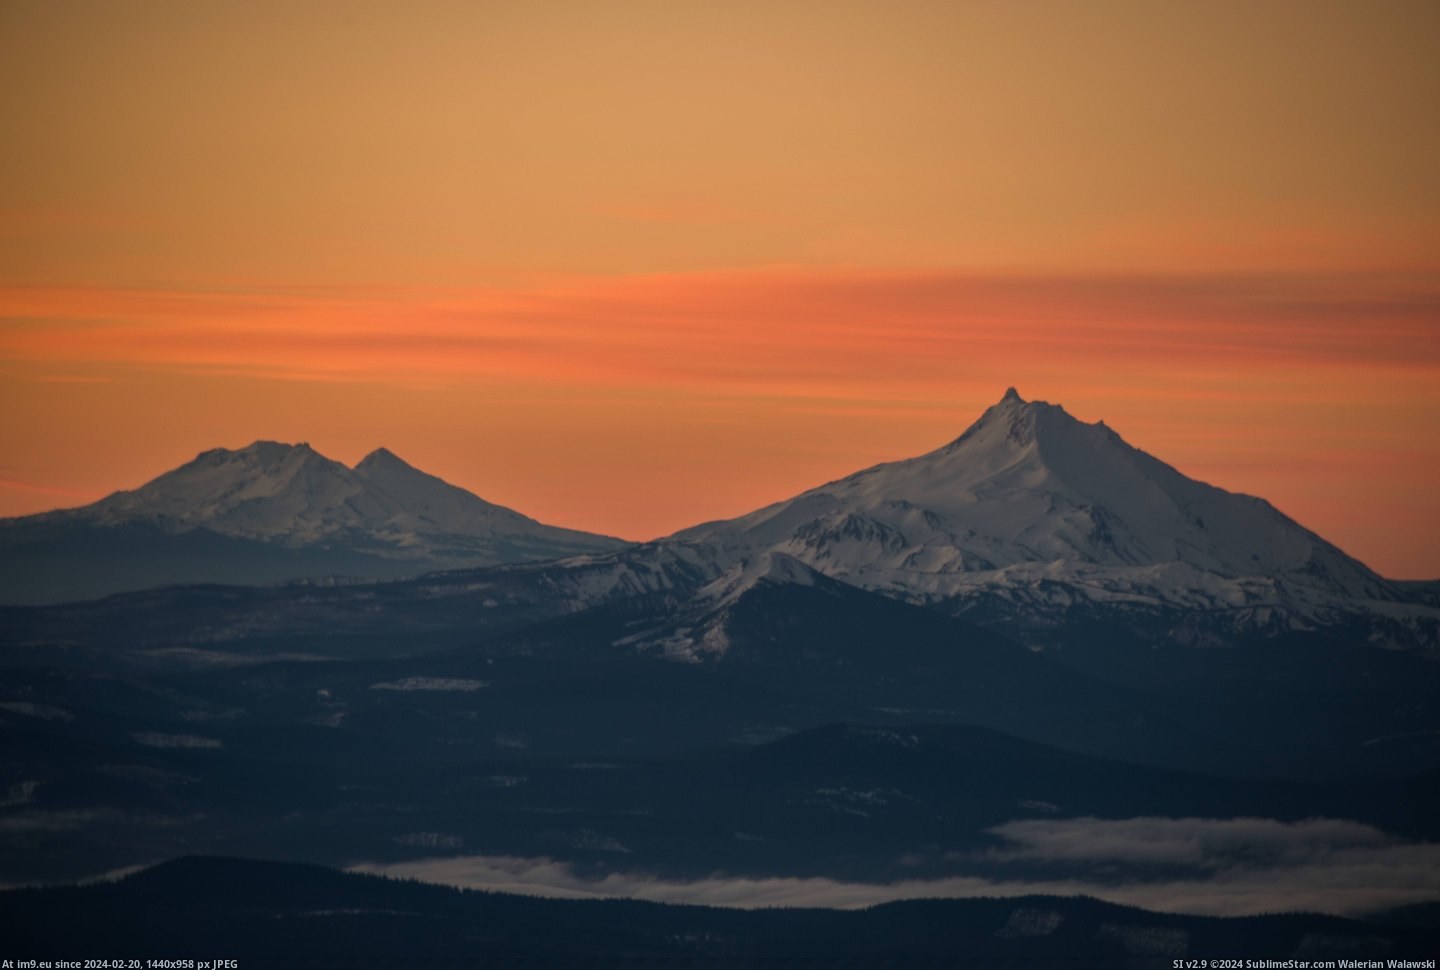 #Photo #Sister #Sunrise #Hood #Jefferson #North #Oregon [Earthporn] A view of Mt. Jefferson, North Sister, and Middle Sister from Mt. Hood, Oregon before the sunrise  [6016x4016] Photo Pic. (Image of album My r/EARTHPORN favs))